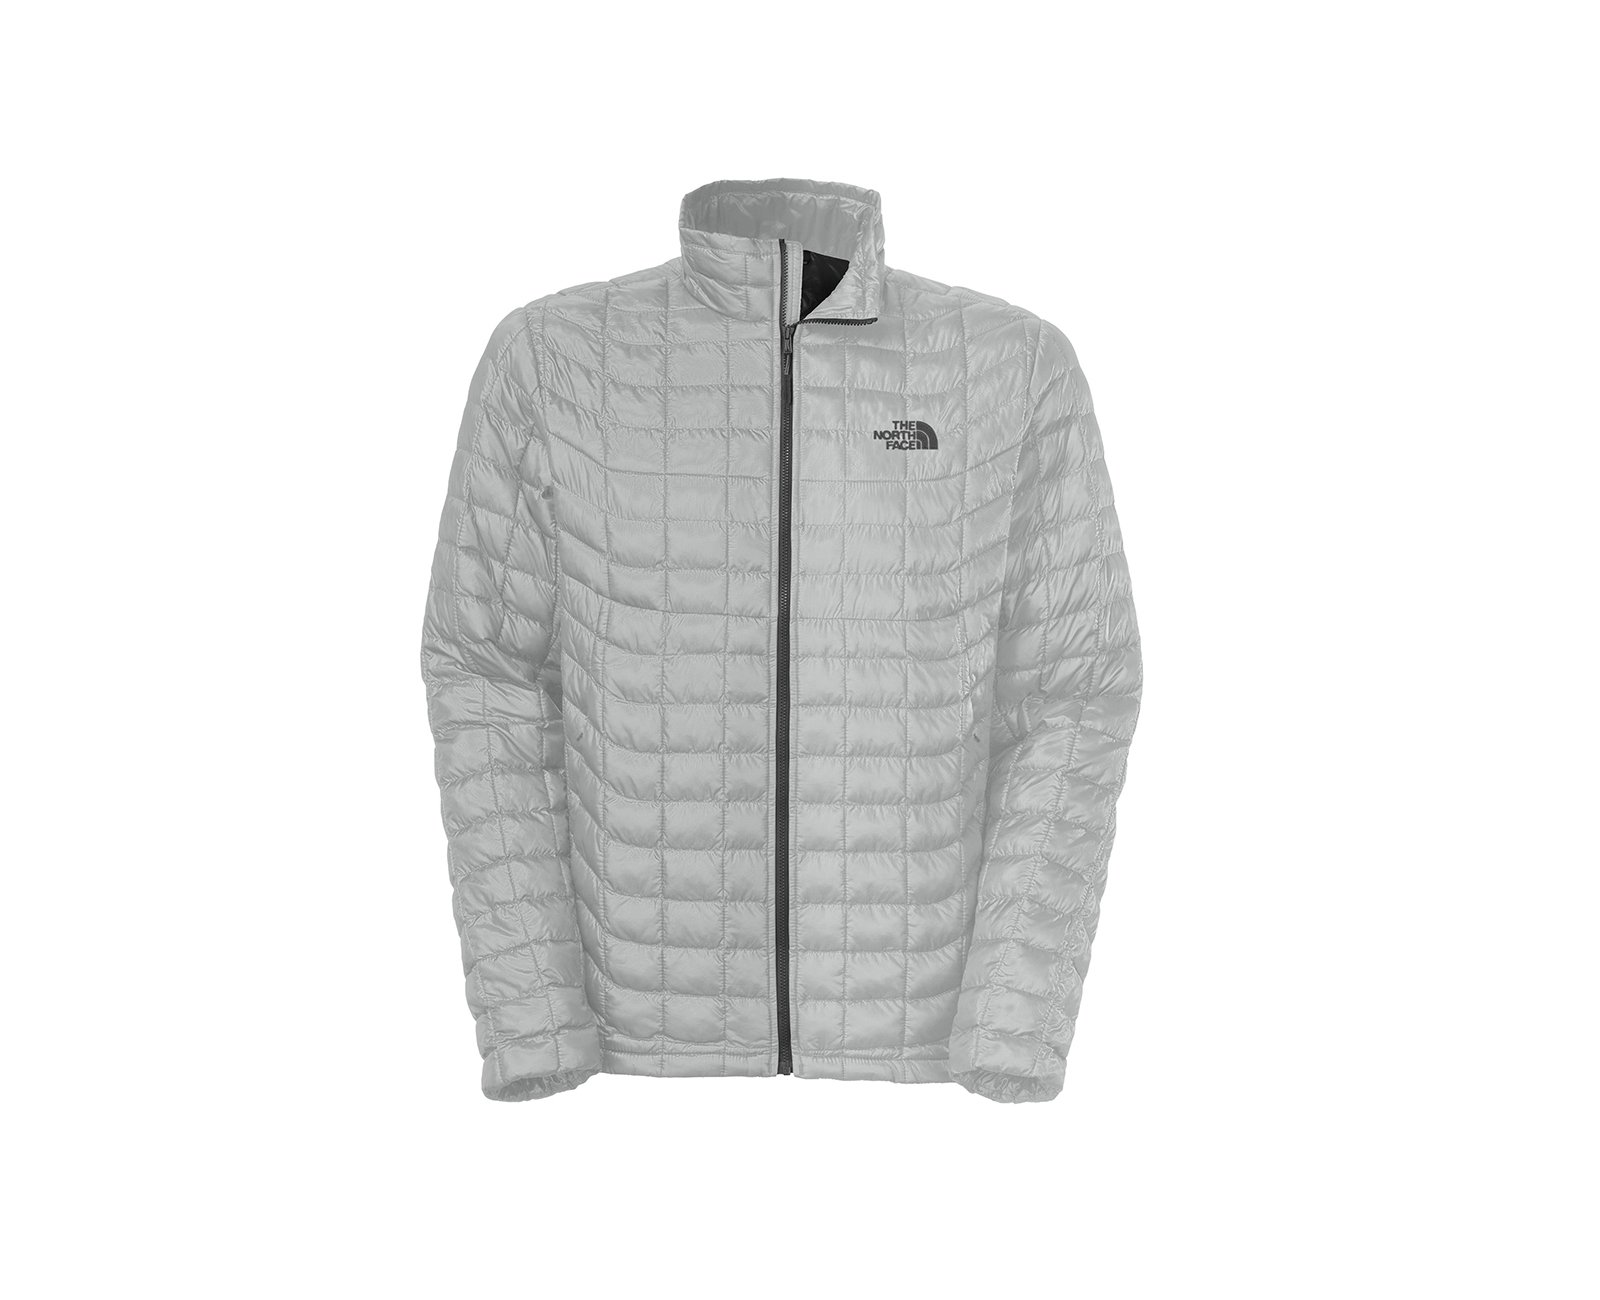 Jaqueta Thermoball Full Zip Masculina - Cinza  - The North Face